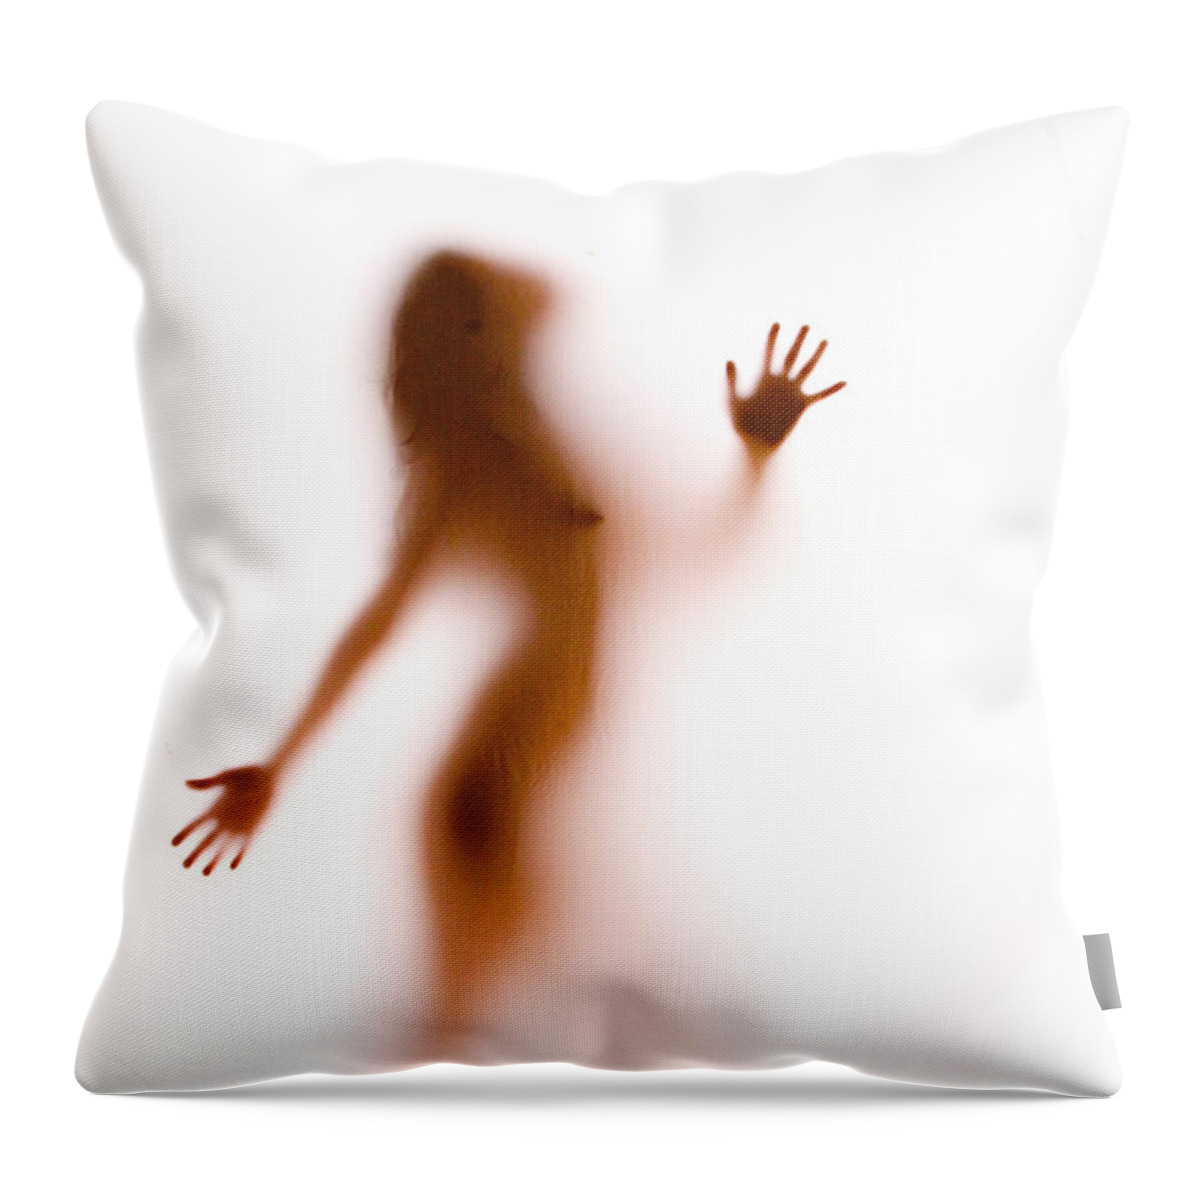 Silhouette Throw Pillow featuring the photograph Silhouette 27 by Michael Fryd